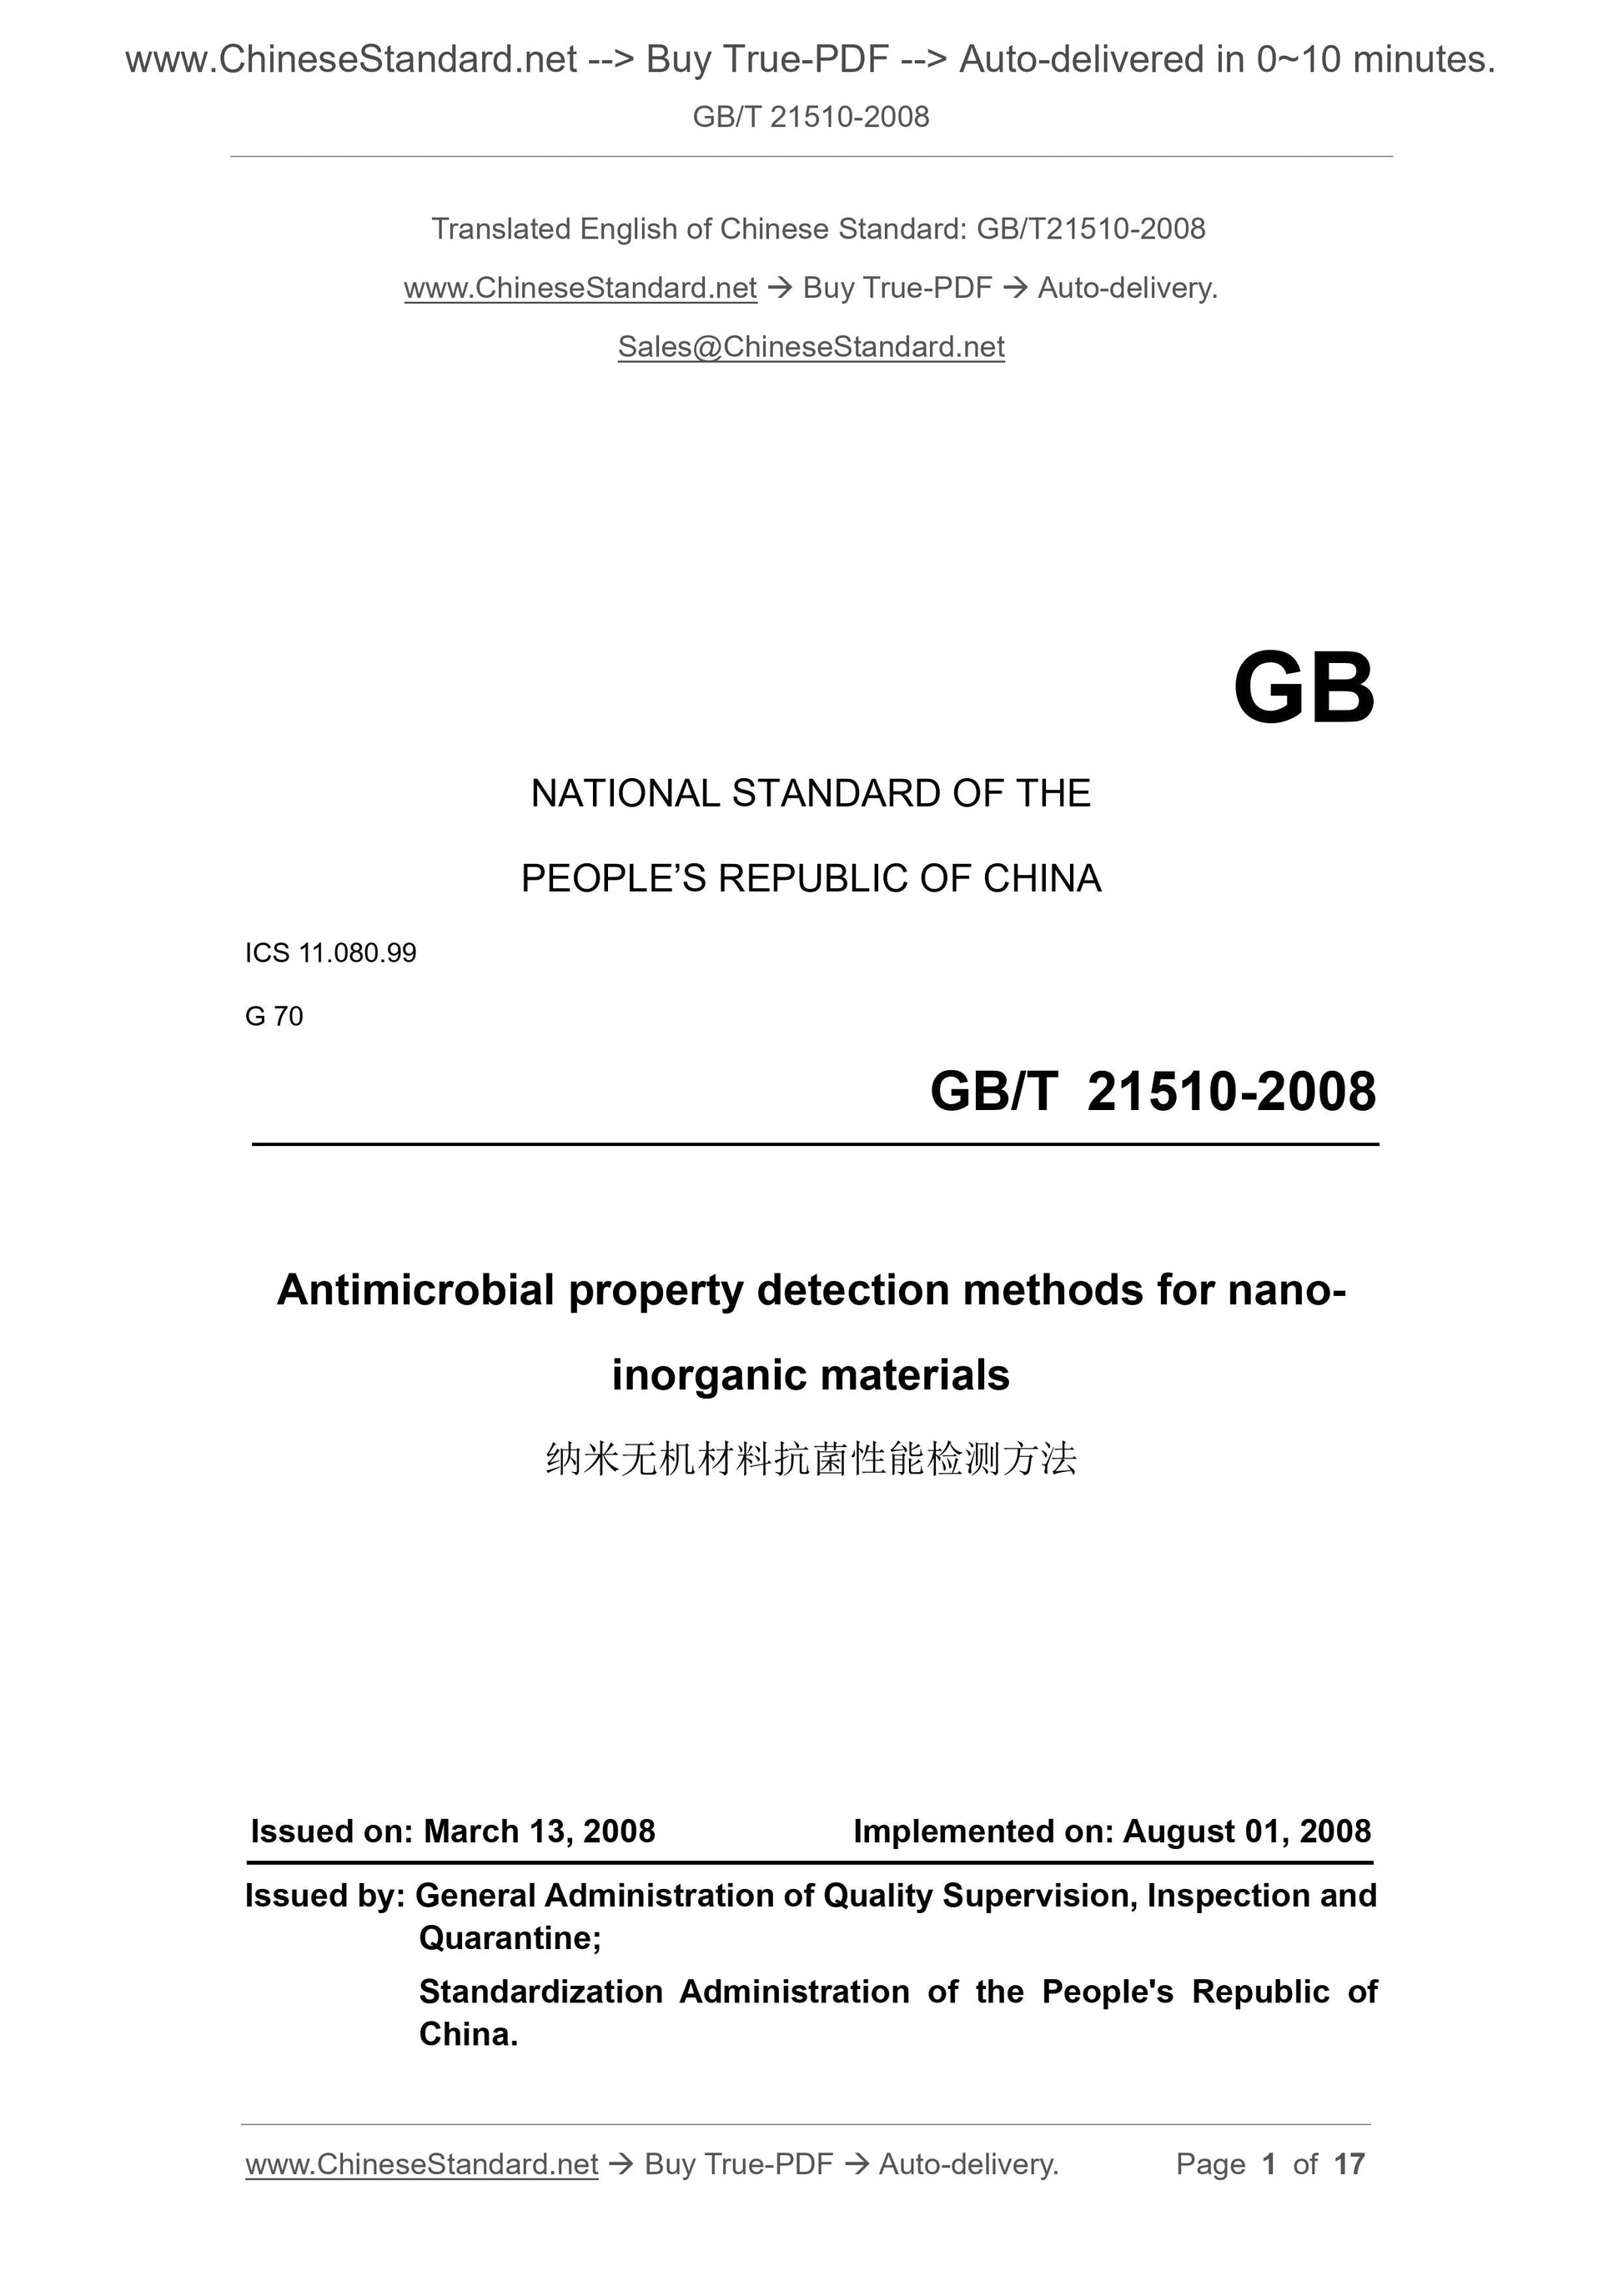 GB/T 21510-2008 Page 1